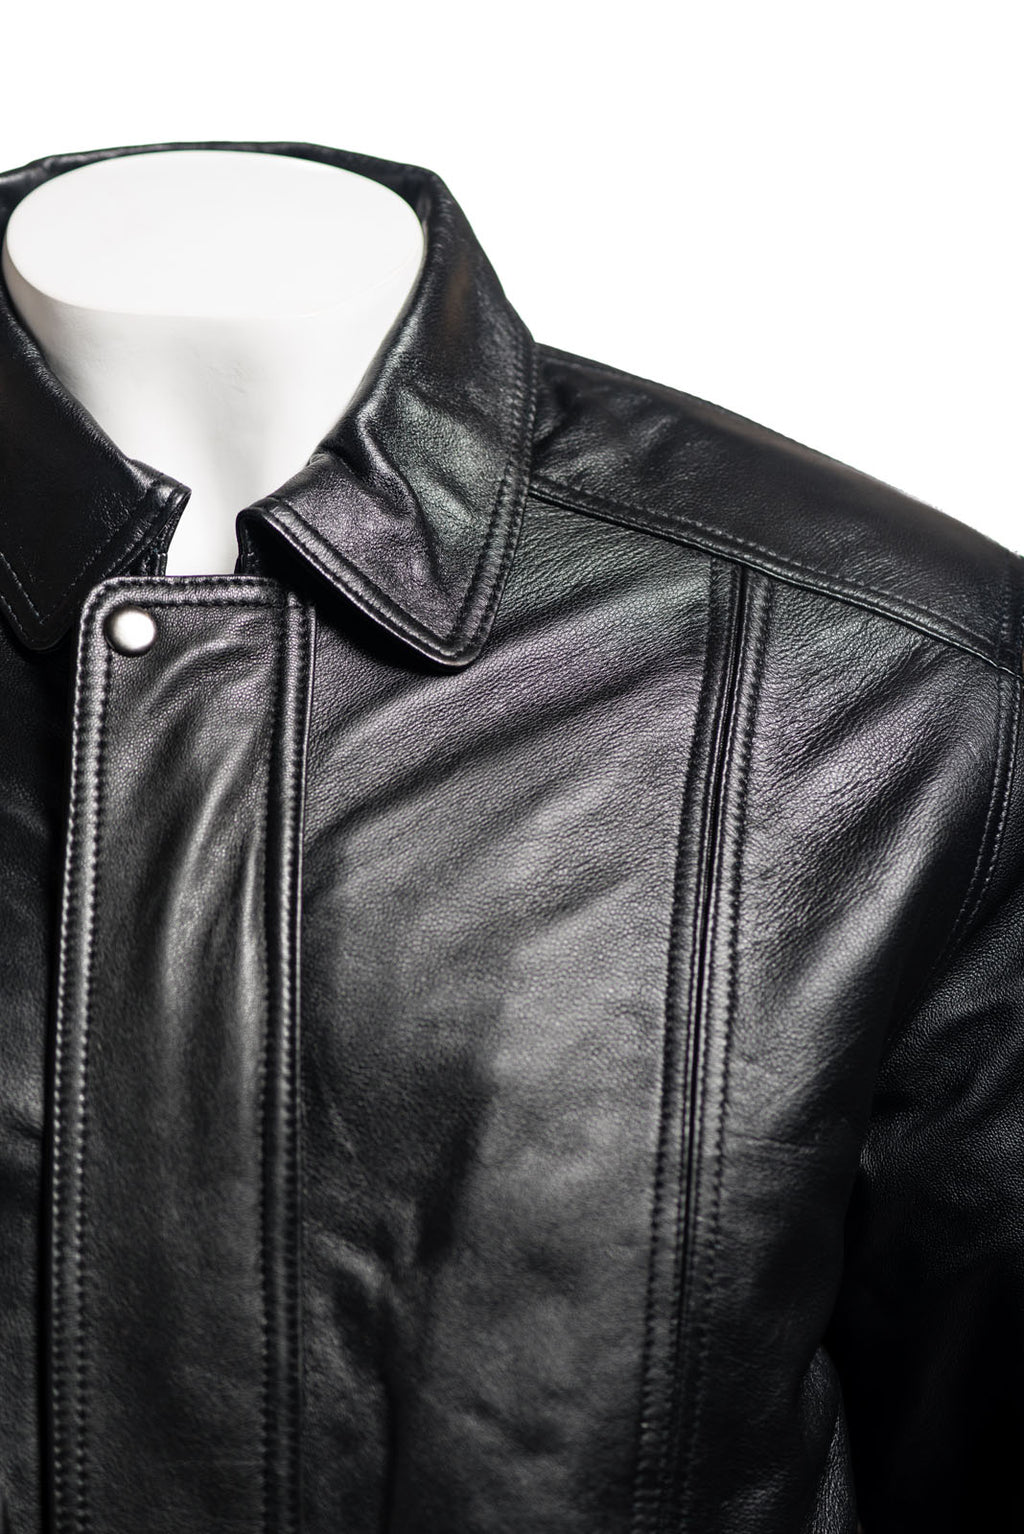 Men's Black Simple Blouson Style Leather Jacket with Elasticated Waist: Giuliano